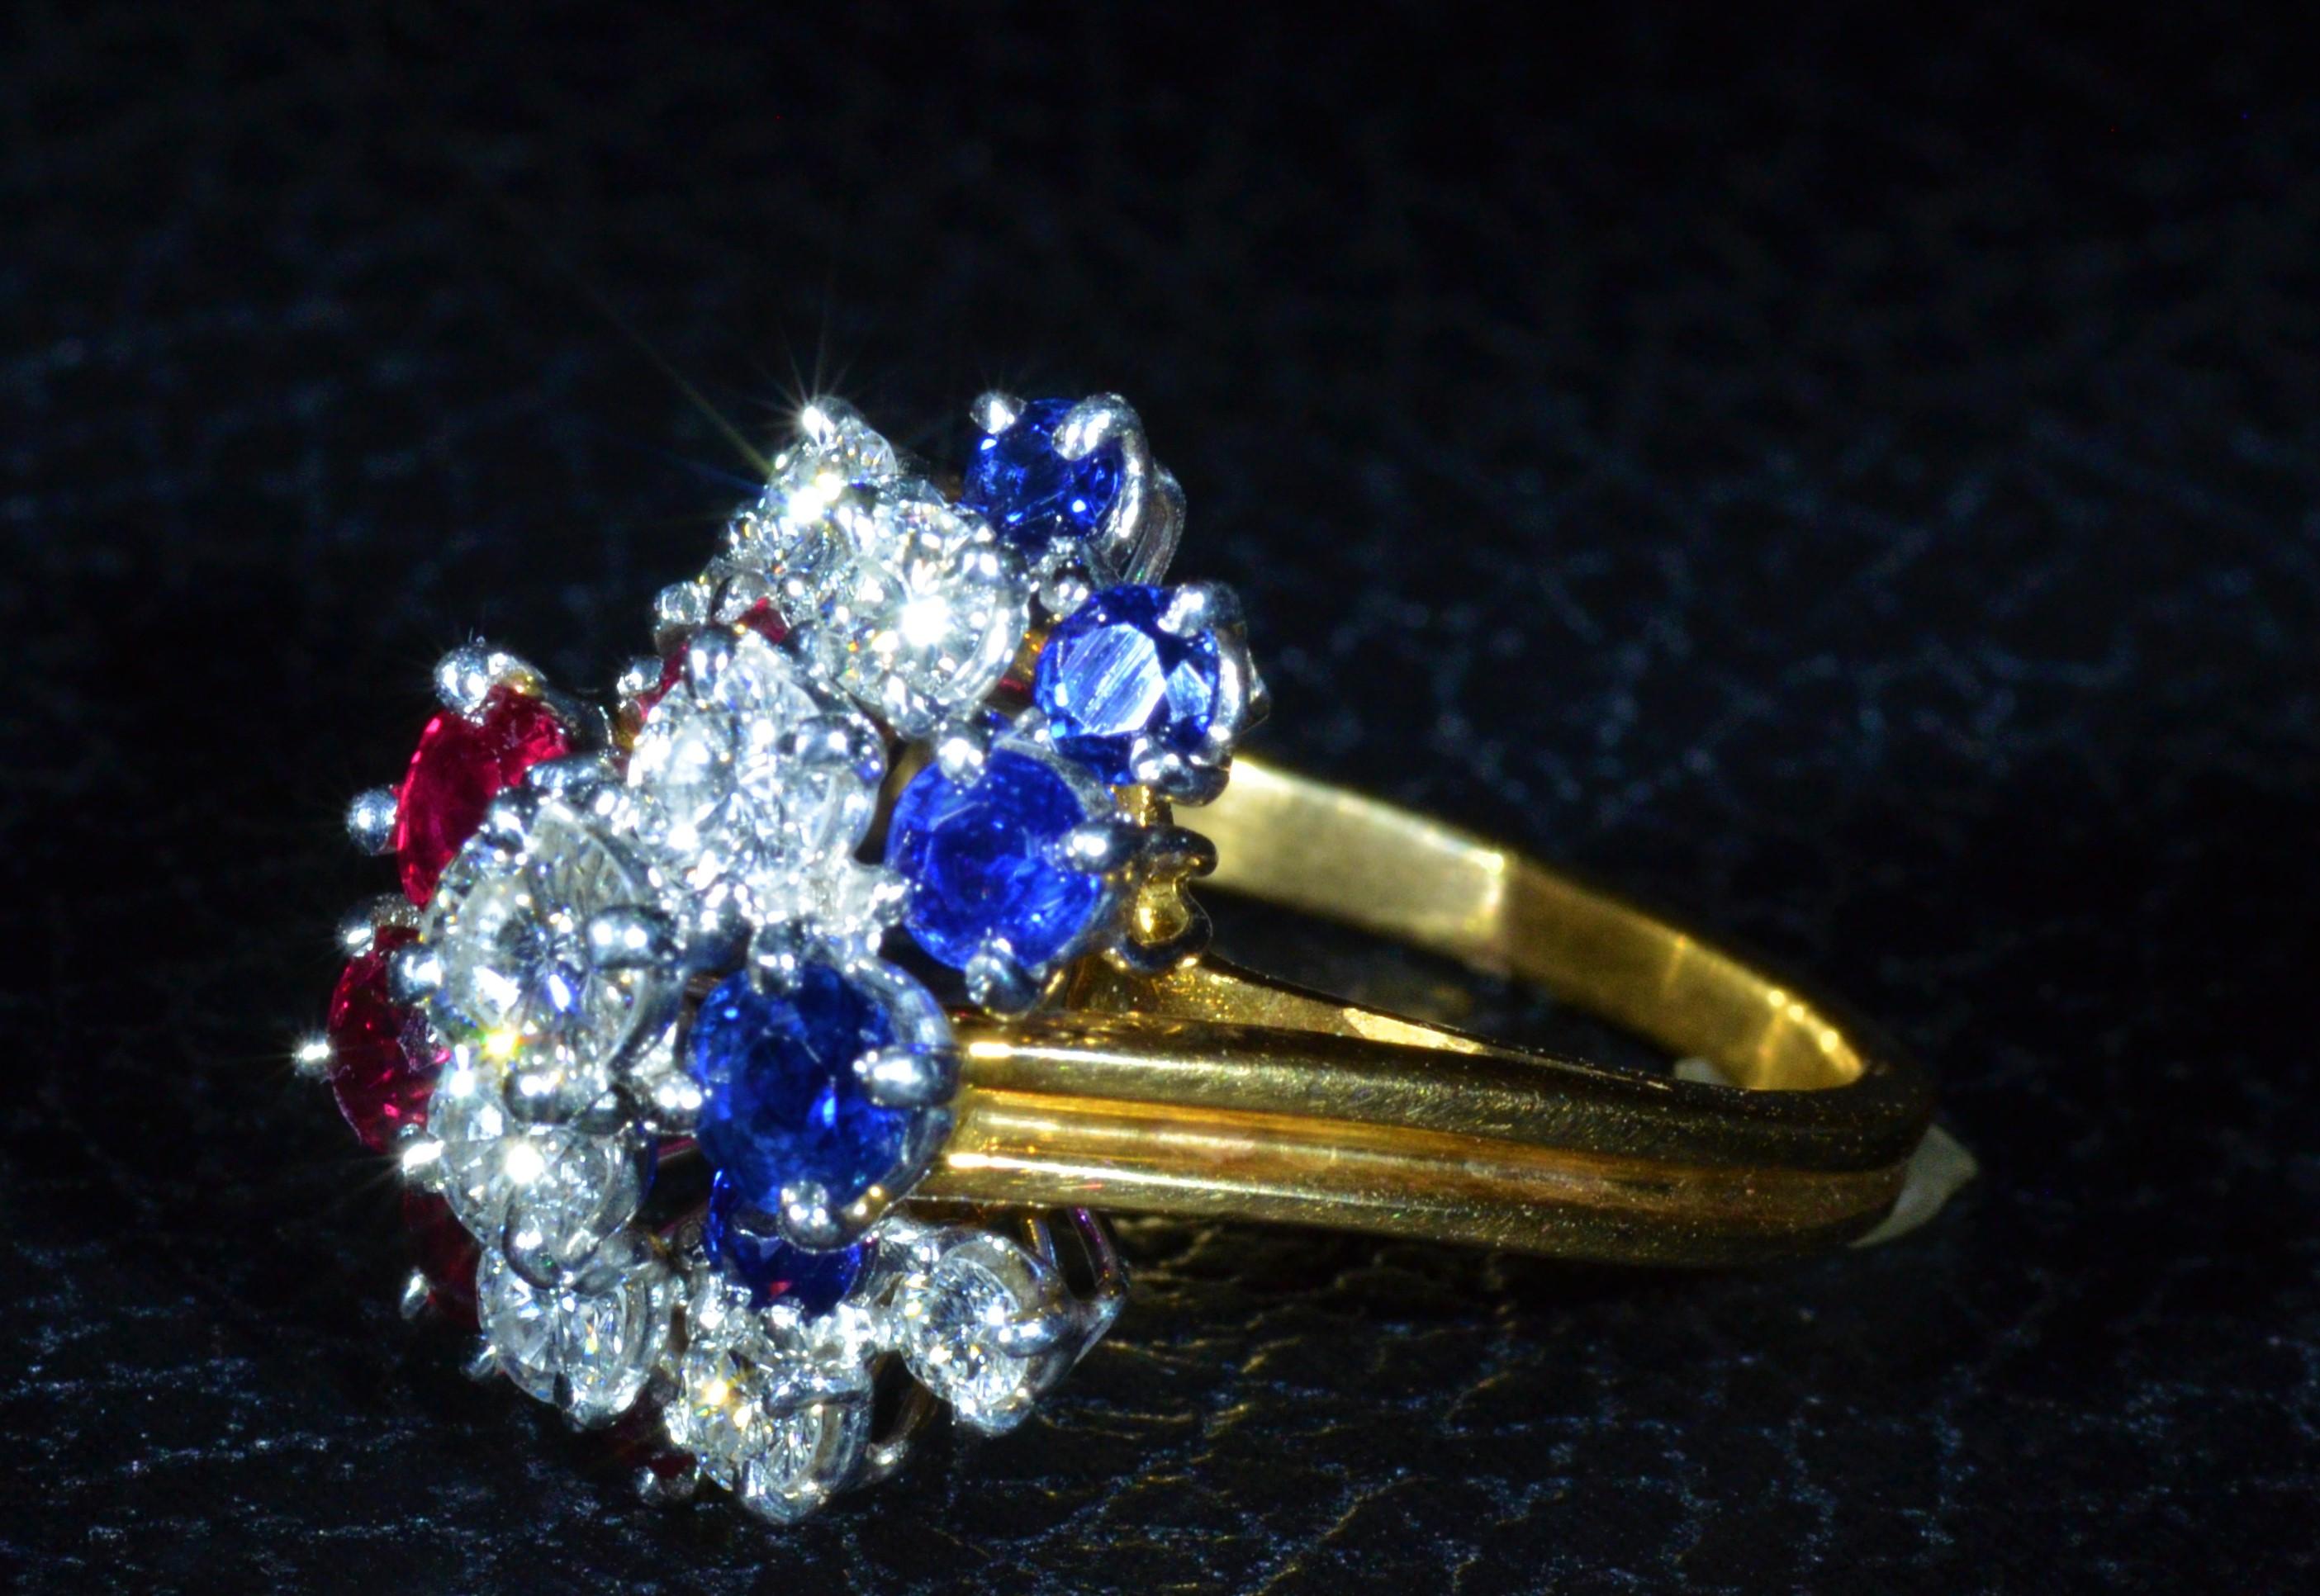 Round Cut Patriotic Oscar Heyman Signed Ruby, Diamond, Sapphire Ring in 18 Karat and Plat For Sale